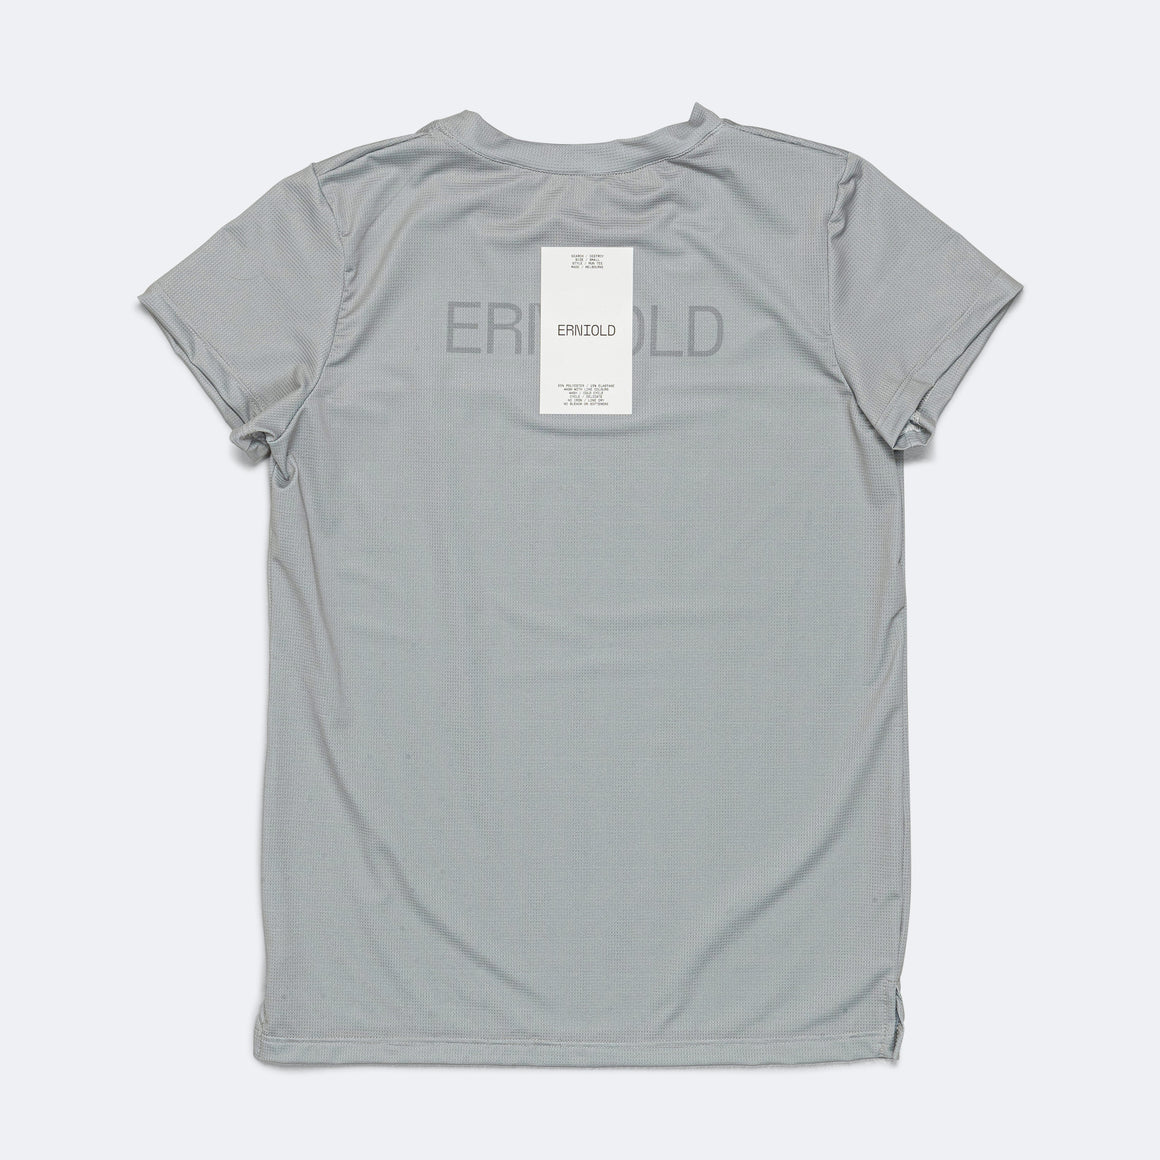 Erniold - Womens Run Tee - Fog - Up There Athletics